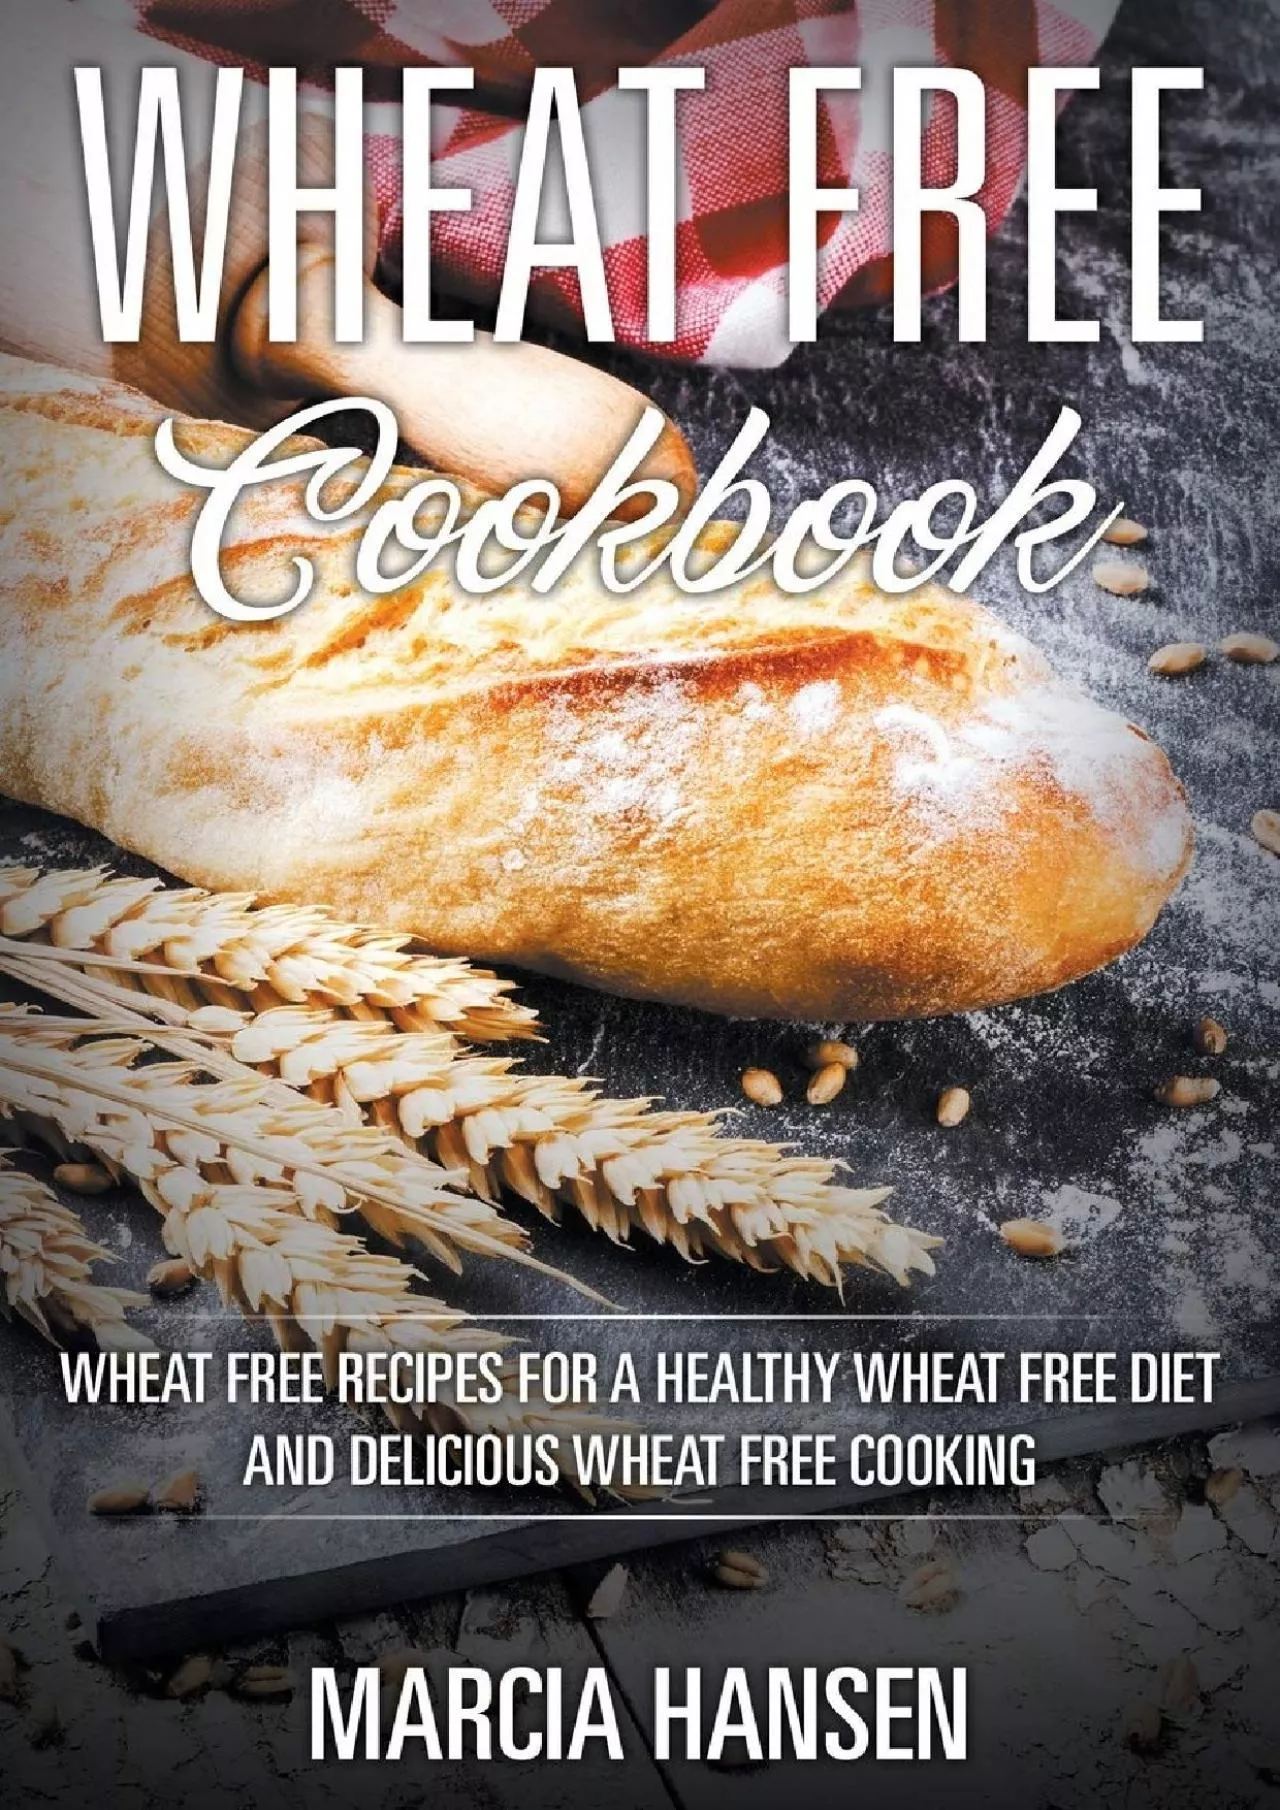 (BOOS)-Wheat Free Cookbook: Wheat Free Recipes for a Healthy Wheat Free Diet and Delicious